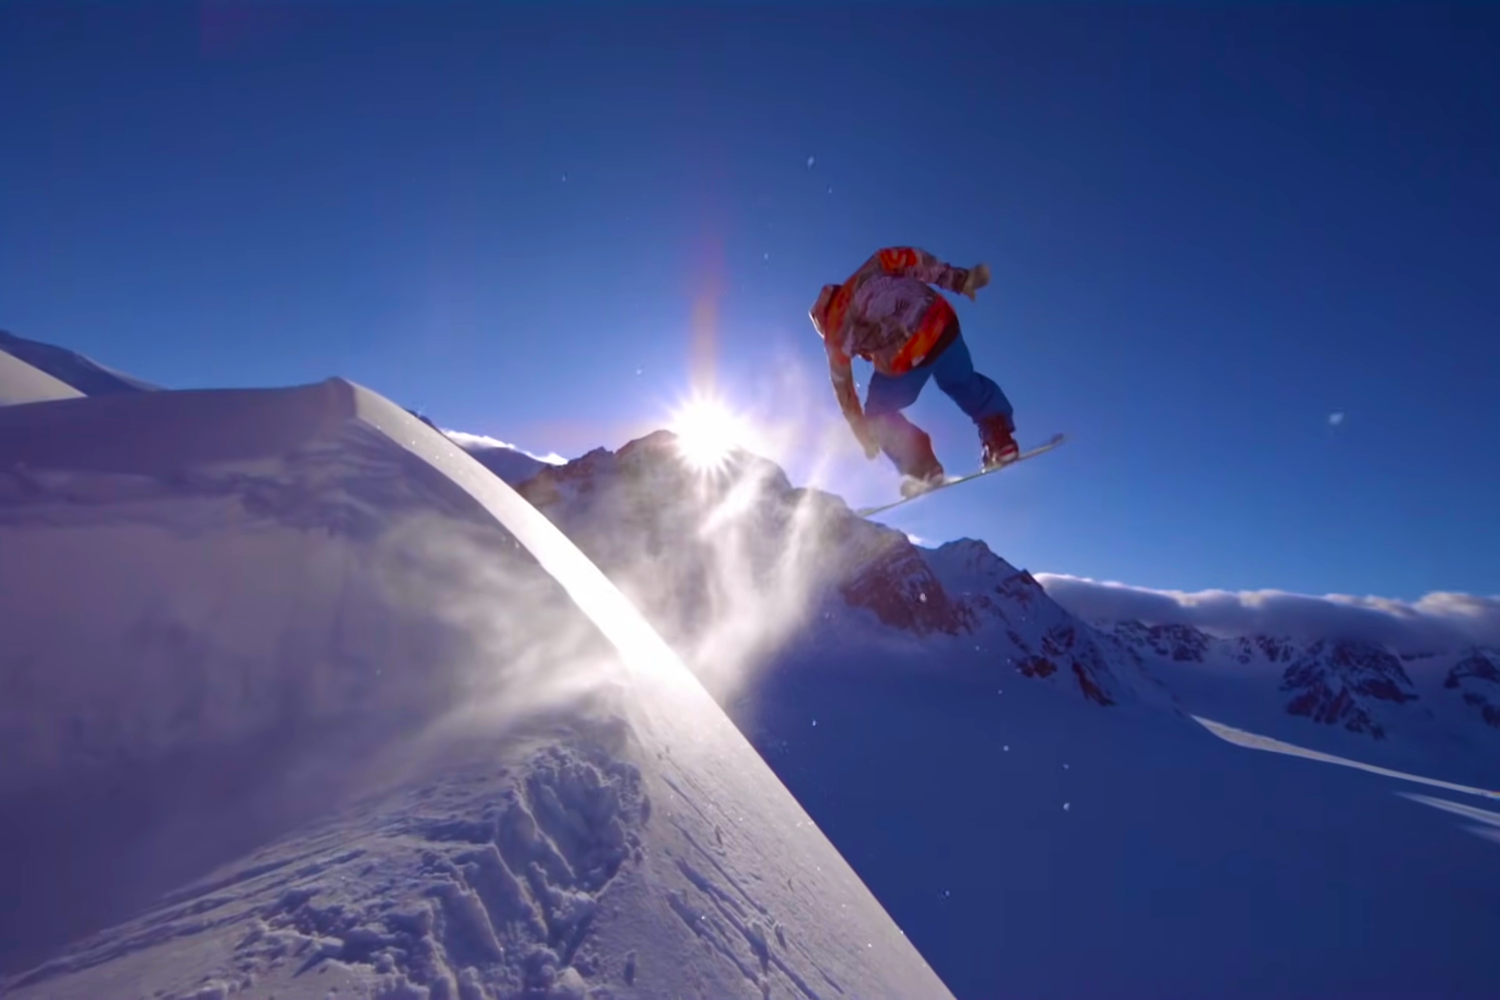 Prestatie het einde Mis The 8 best snowboarding movies and documentaries to add to your watch list  - The Manual